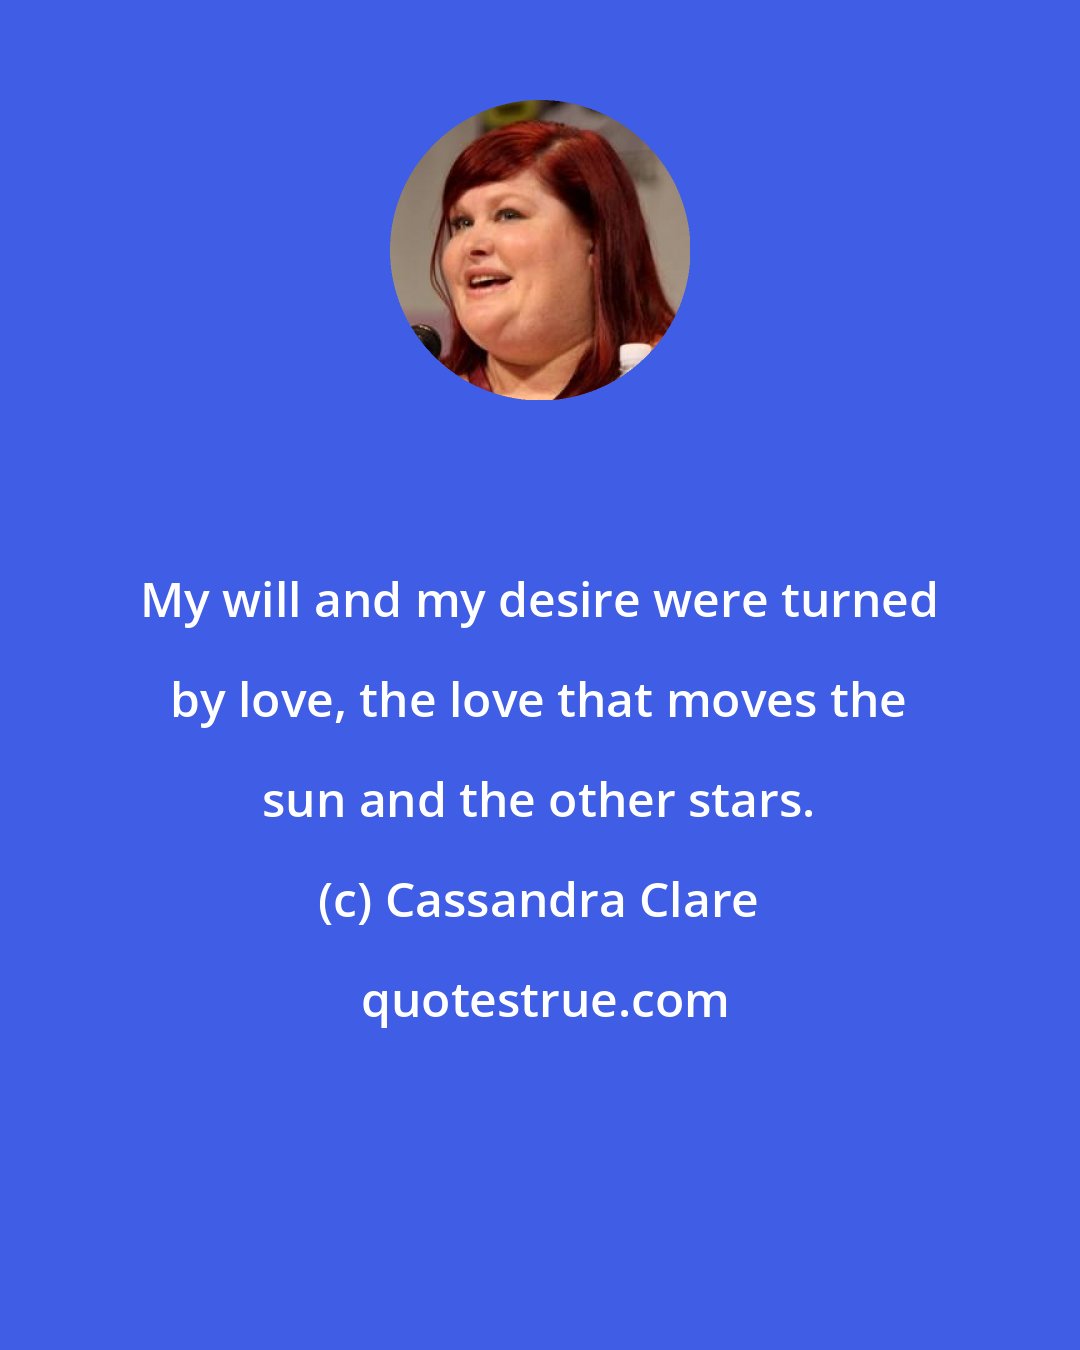 Cassandra Clare: My will and my desire were turned by love, the love that moves the sun and the other stars.